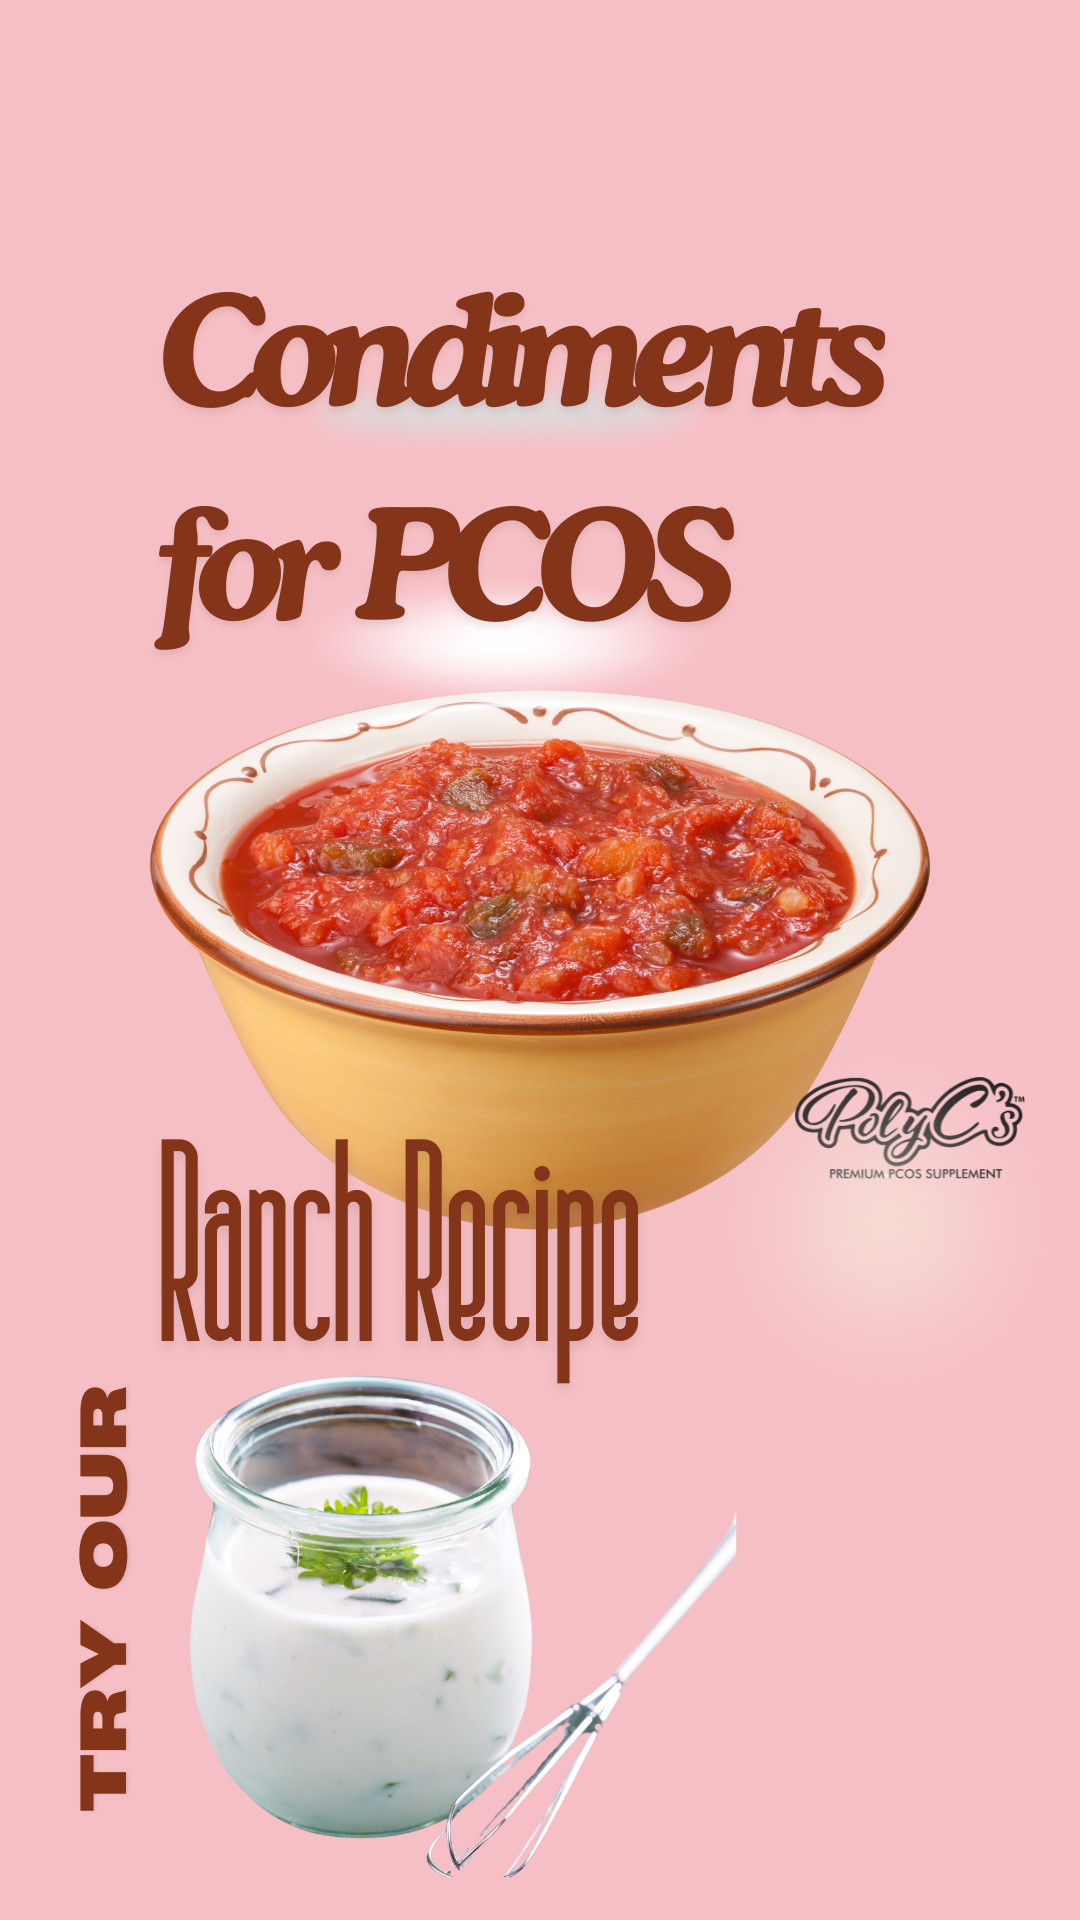 Best Condiments for PCOS